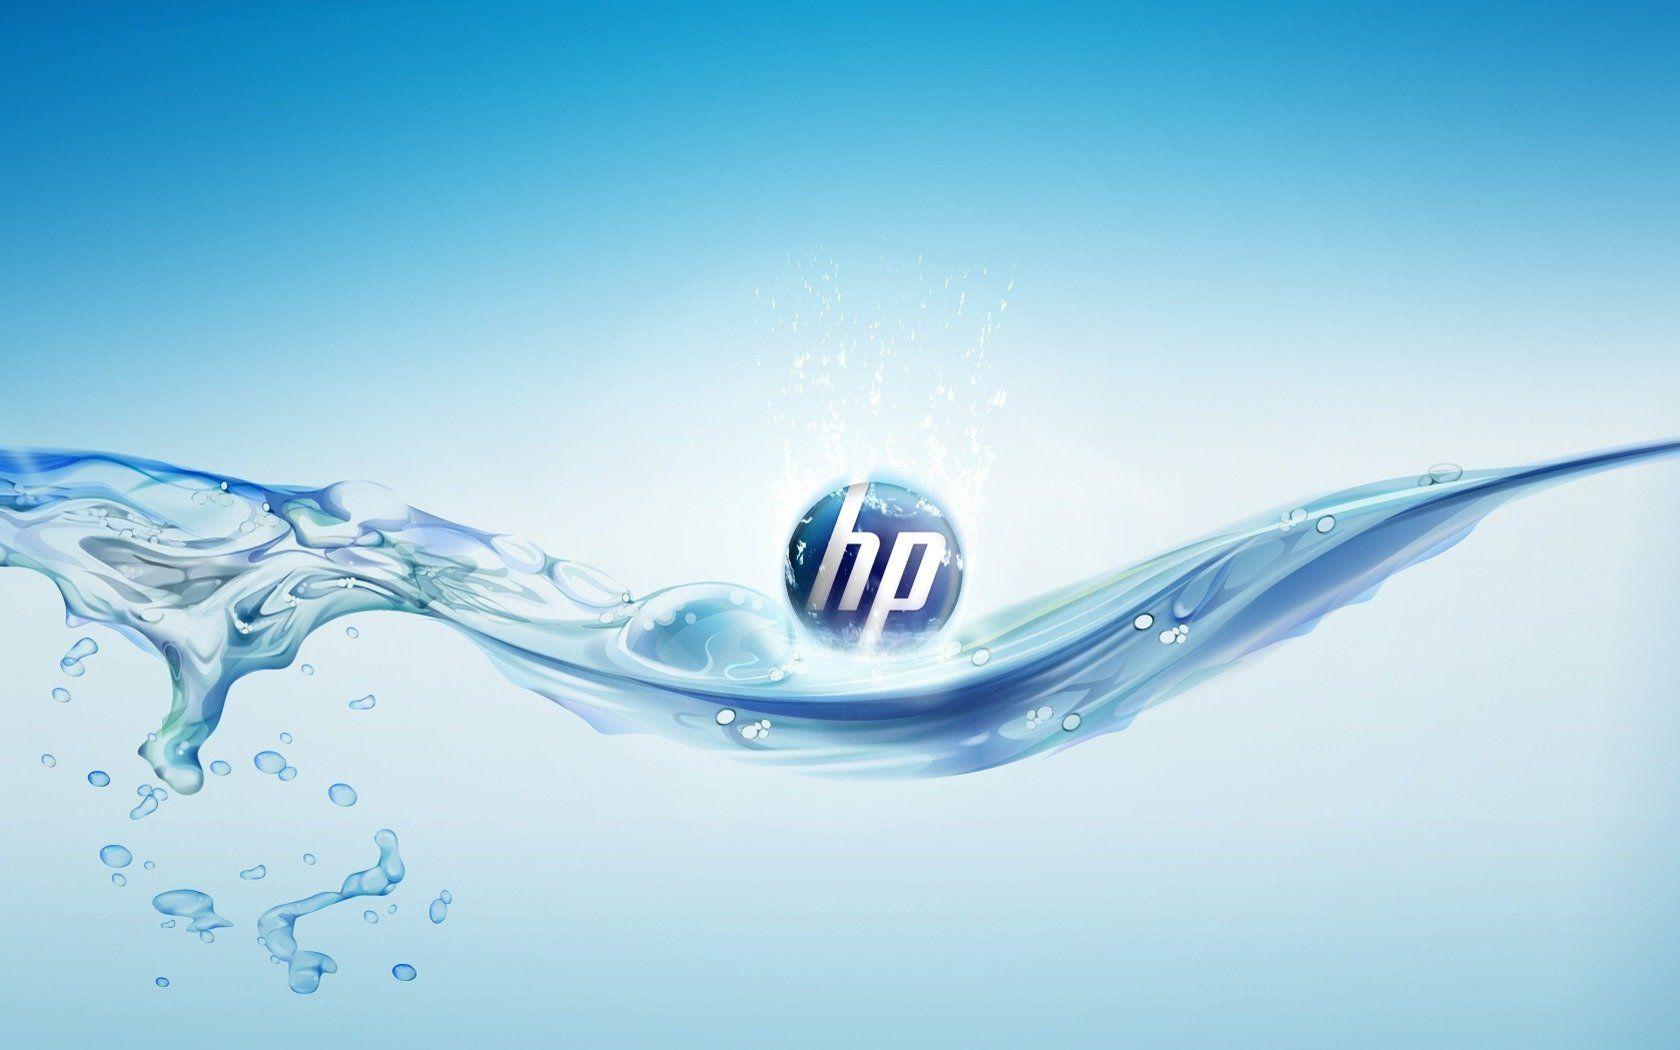 HP 4K Wallpapers Top Free HP 4K Backgrounds WallpaperAccess